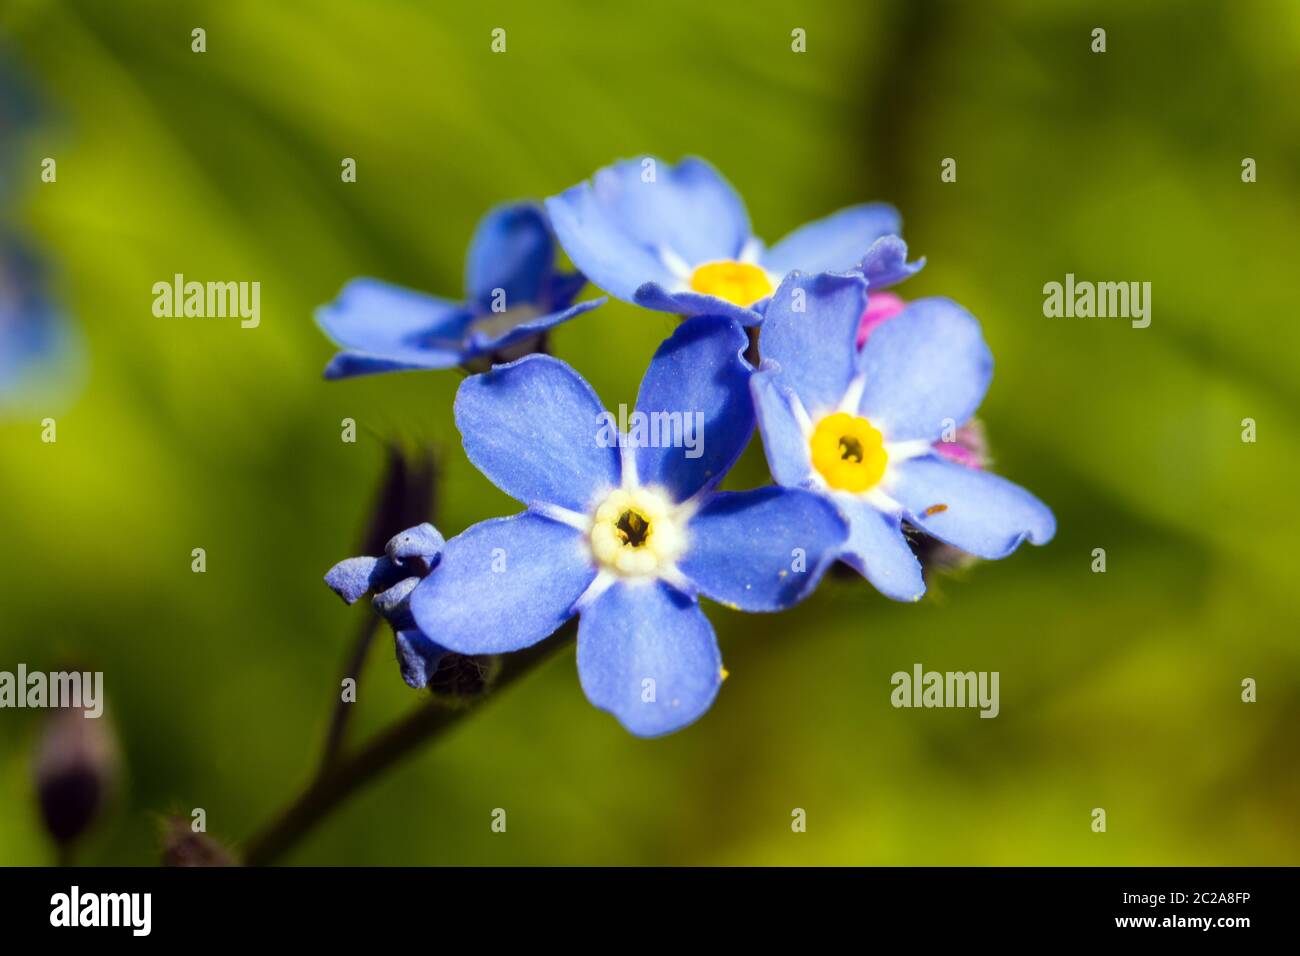 forget-me-nots or scorpion grasses, a small blue flower in the genus myosotis, Boraginaceae family Stock Photo